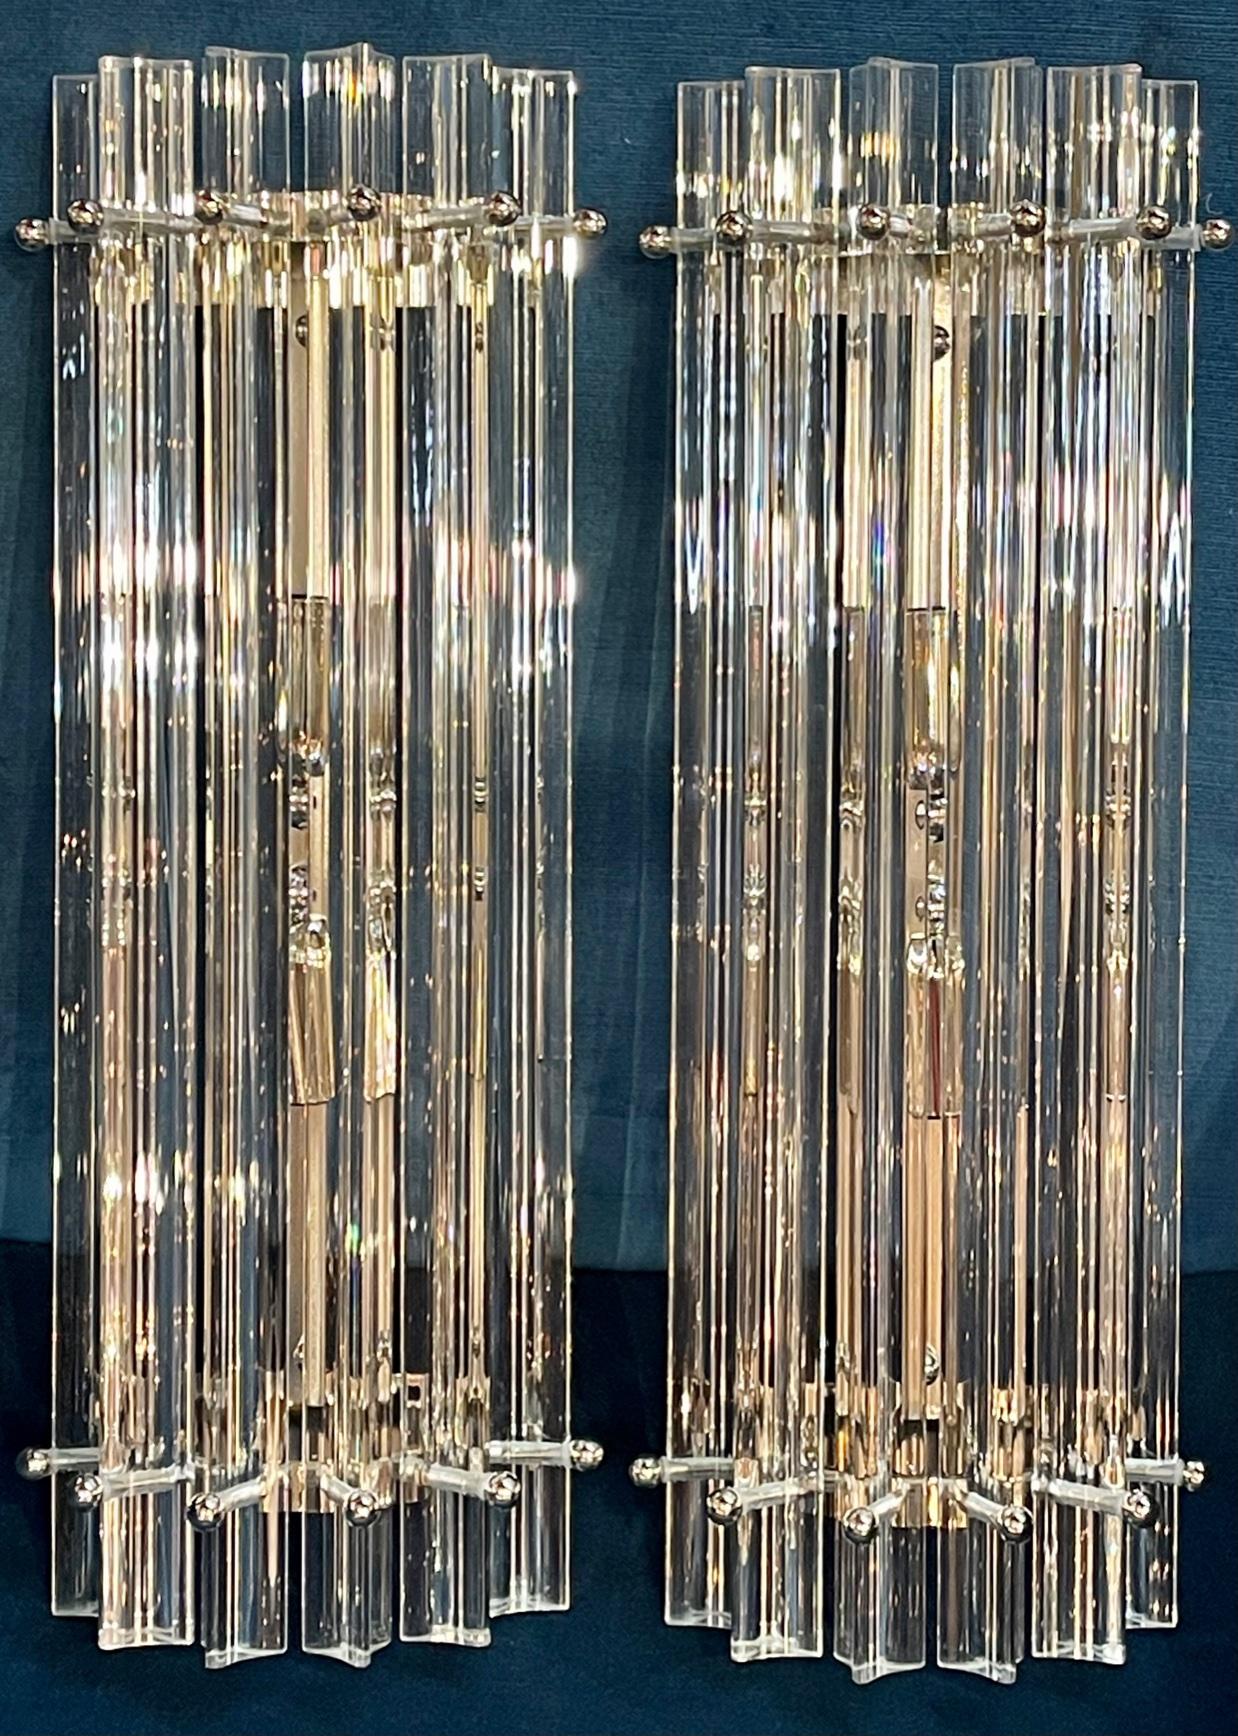 Pair of Murano glass and chrome barber style sconces. Circa 2000. The sconces are wired and ready to hang. Perfect for today's transitional designs!